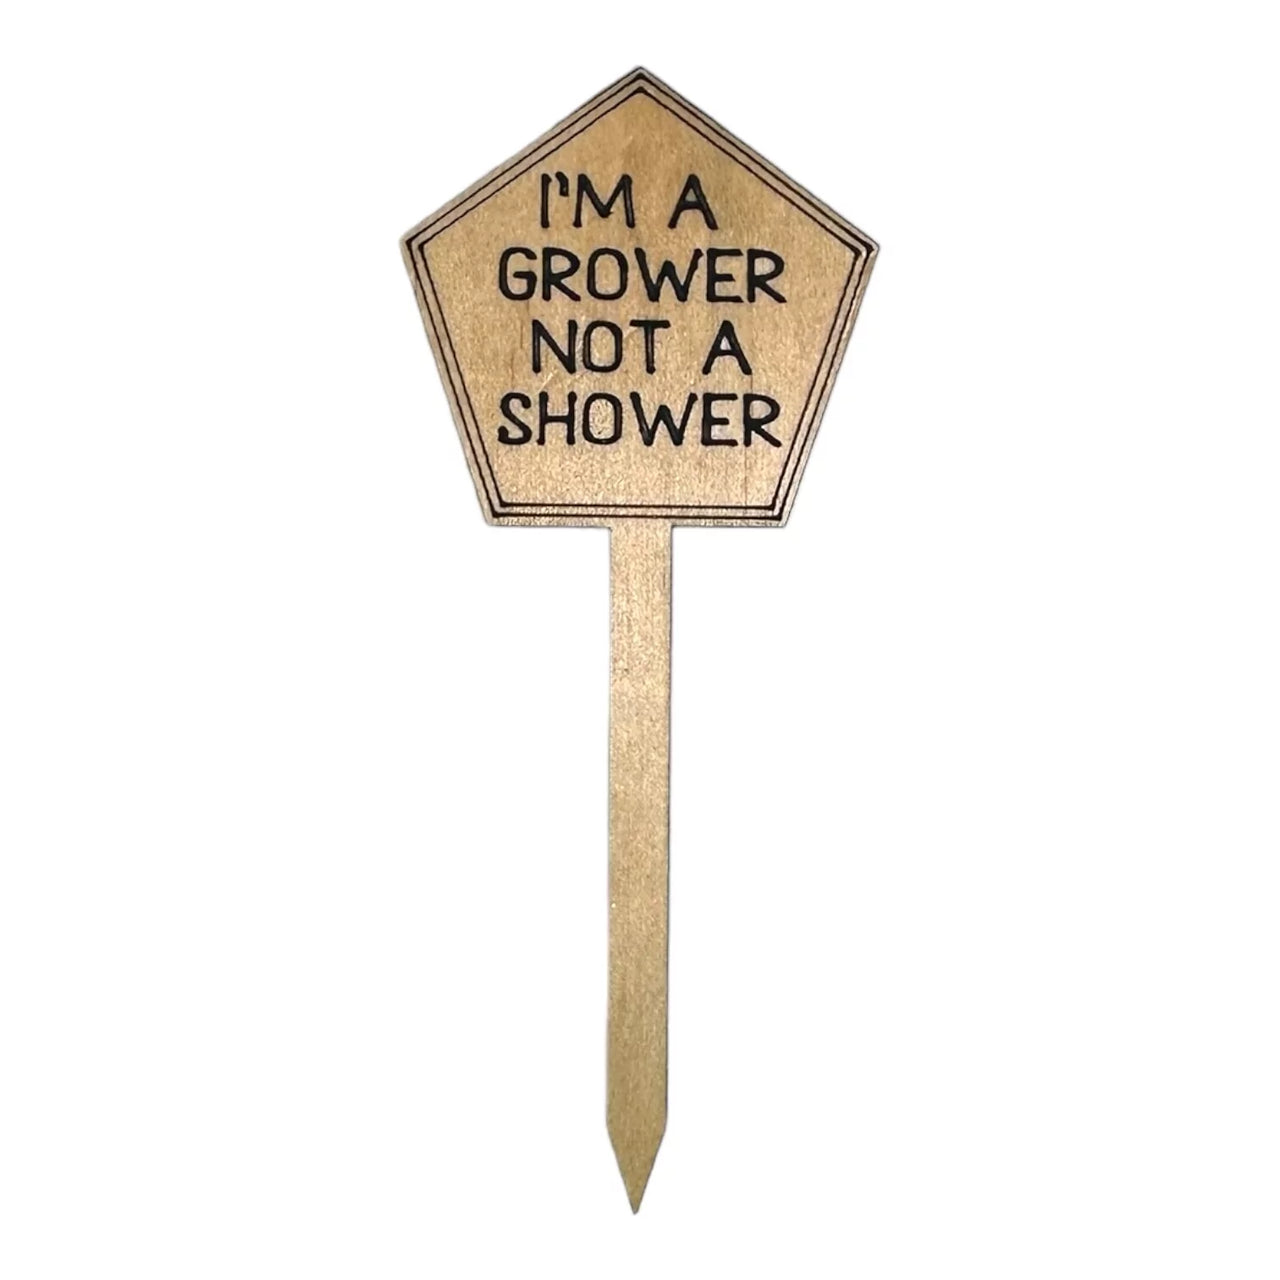 Funny Plant Stakes - Made from Sustainable Timber - IM A GROWER NOT A SHOWER